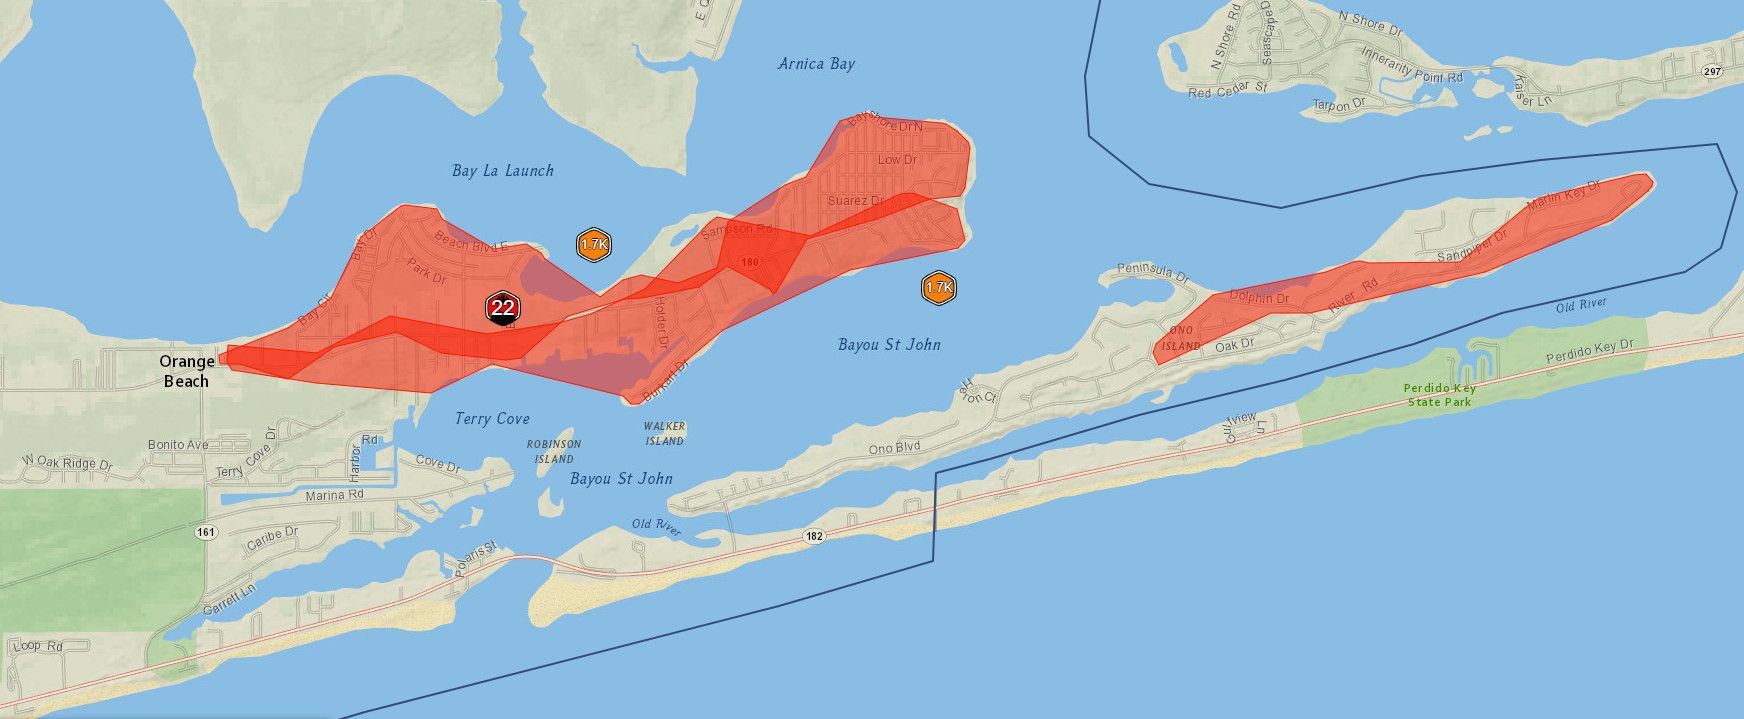 Some Orange Beach Residents Face Second Day of Power Outages